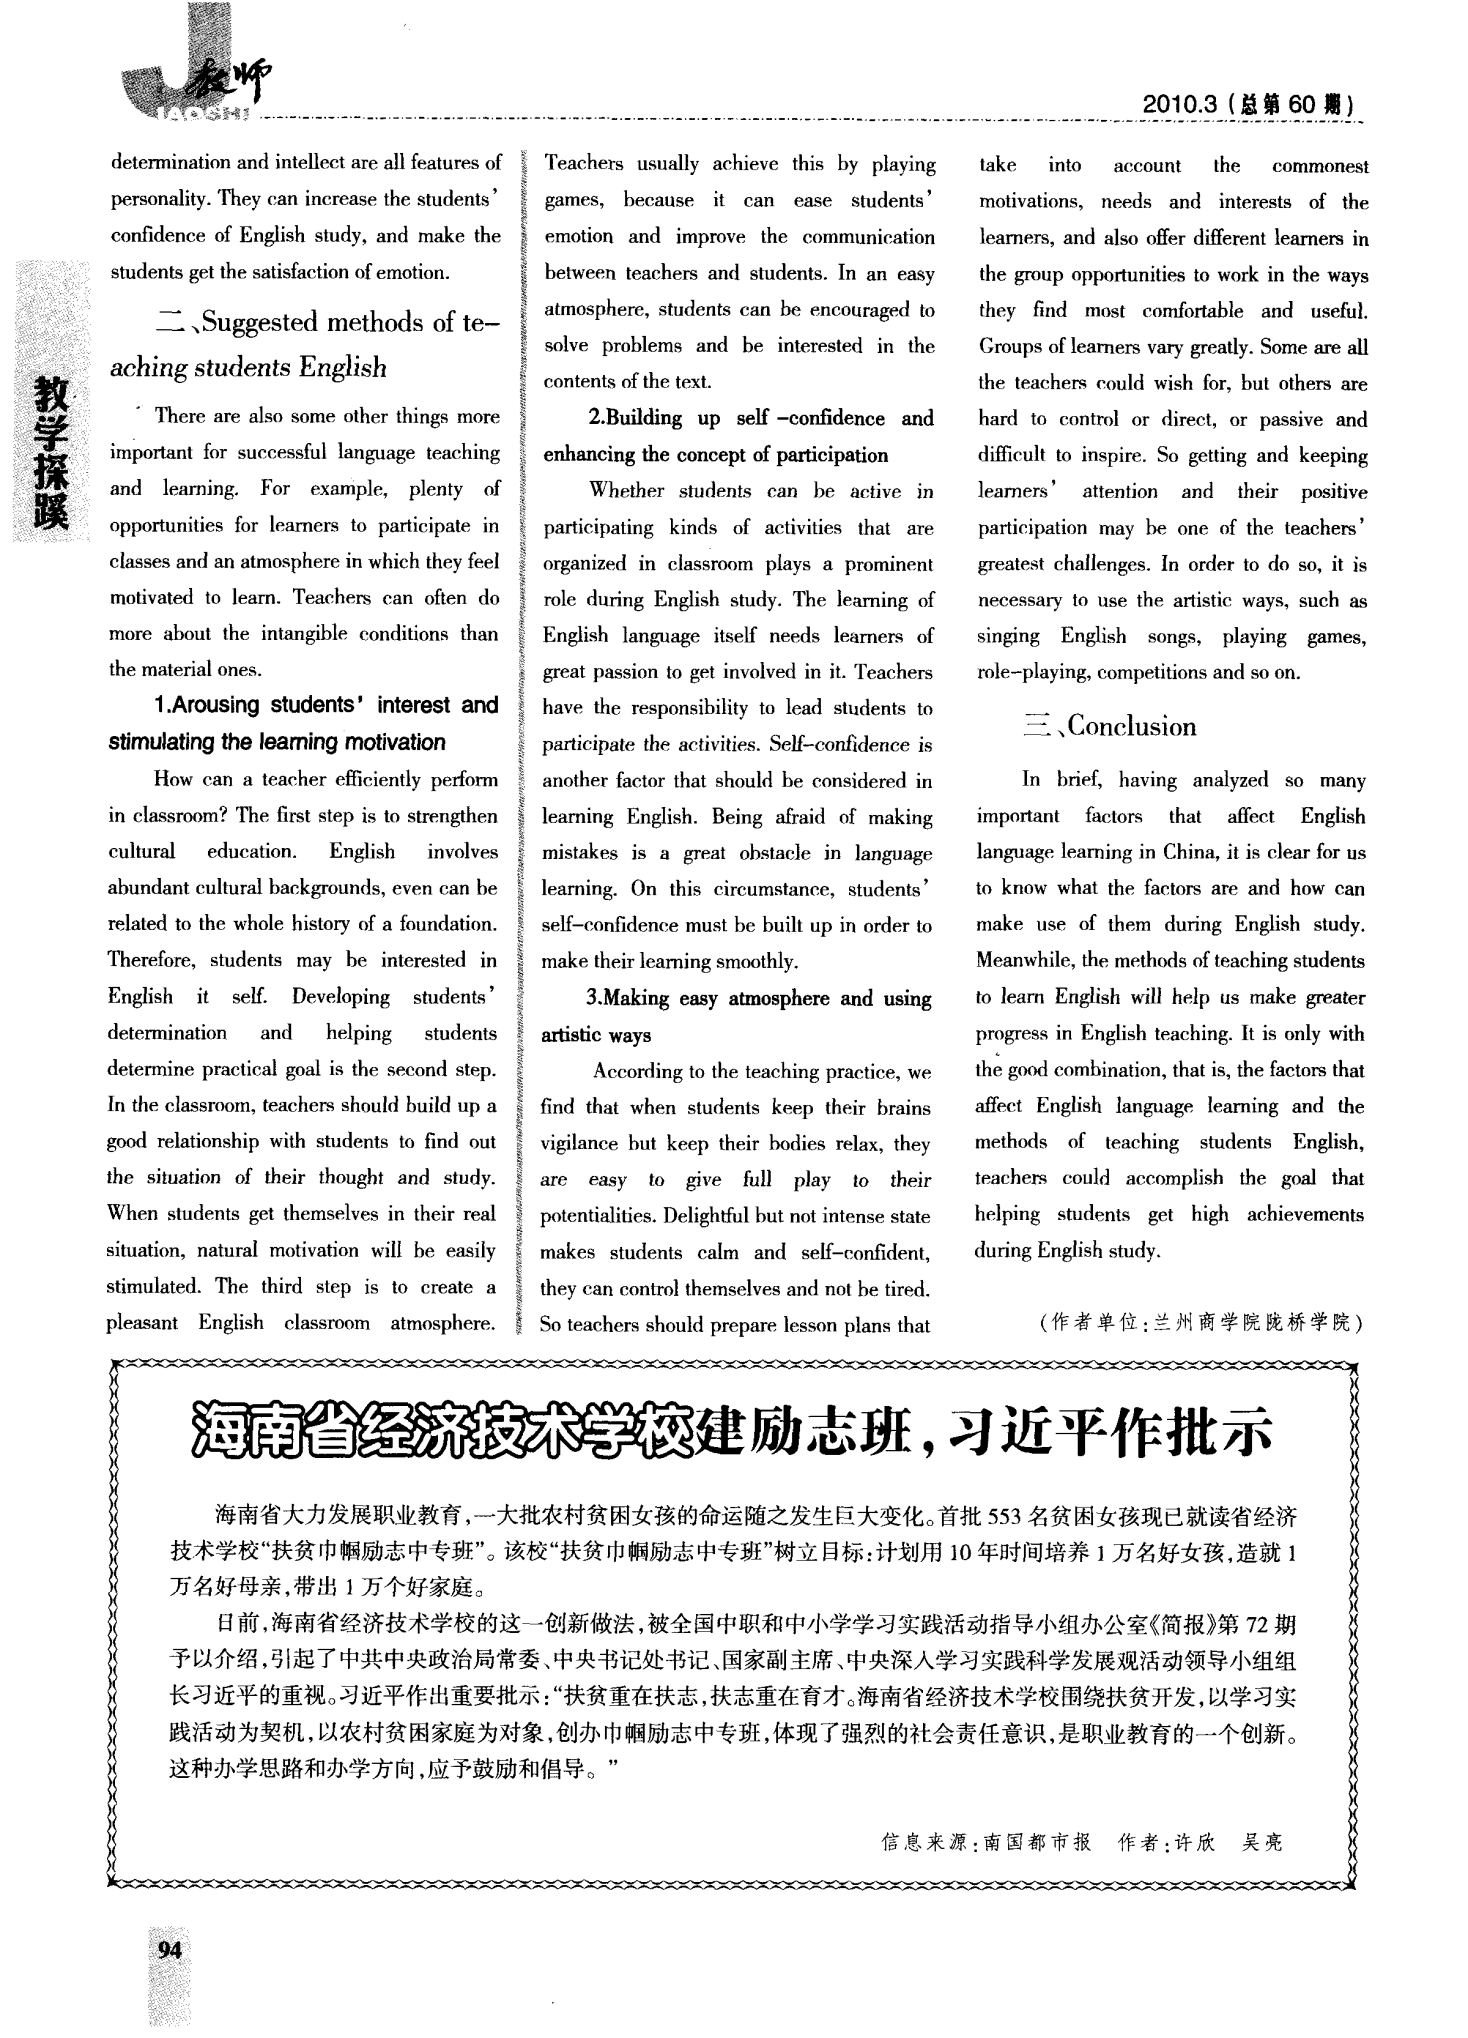 ANALYZING THE FACTORS THAT AFFECT ENGLISH LANGUAGE LEARNING IN CHINA